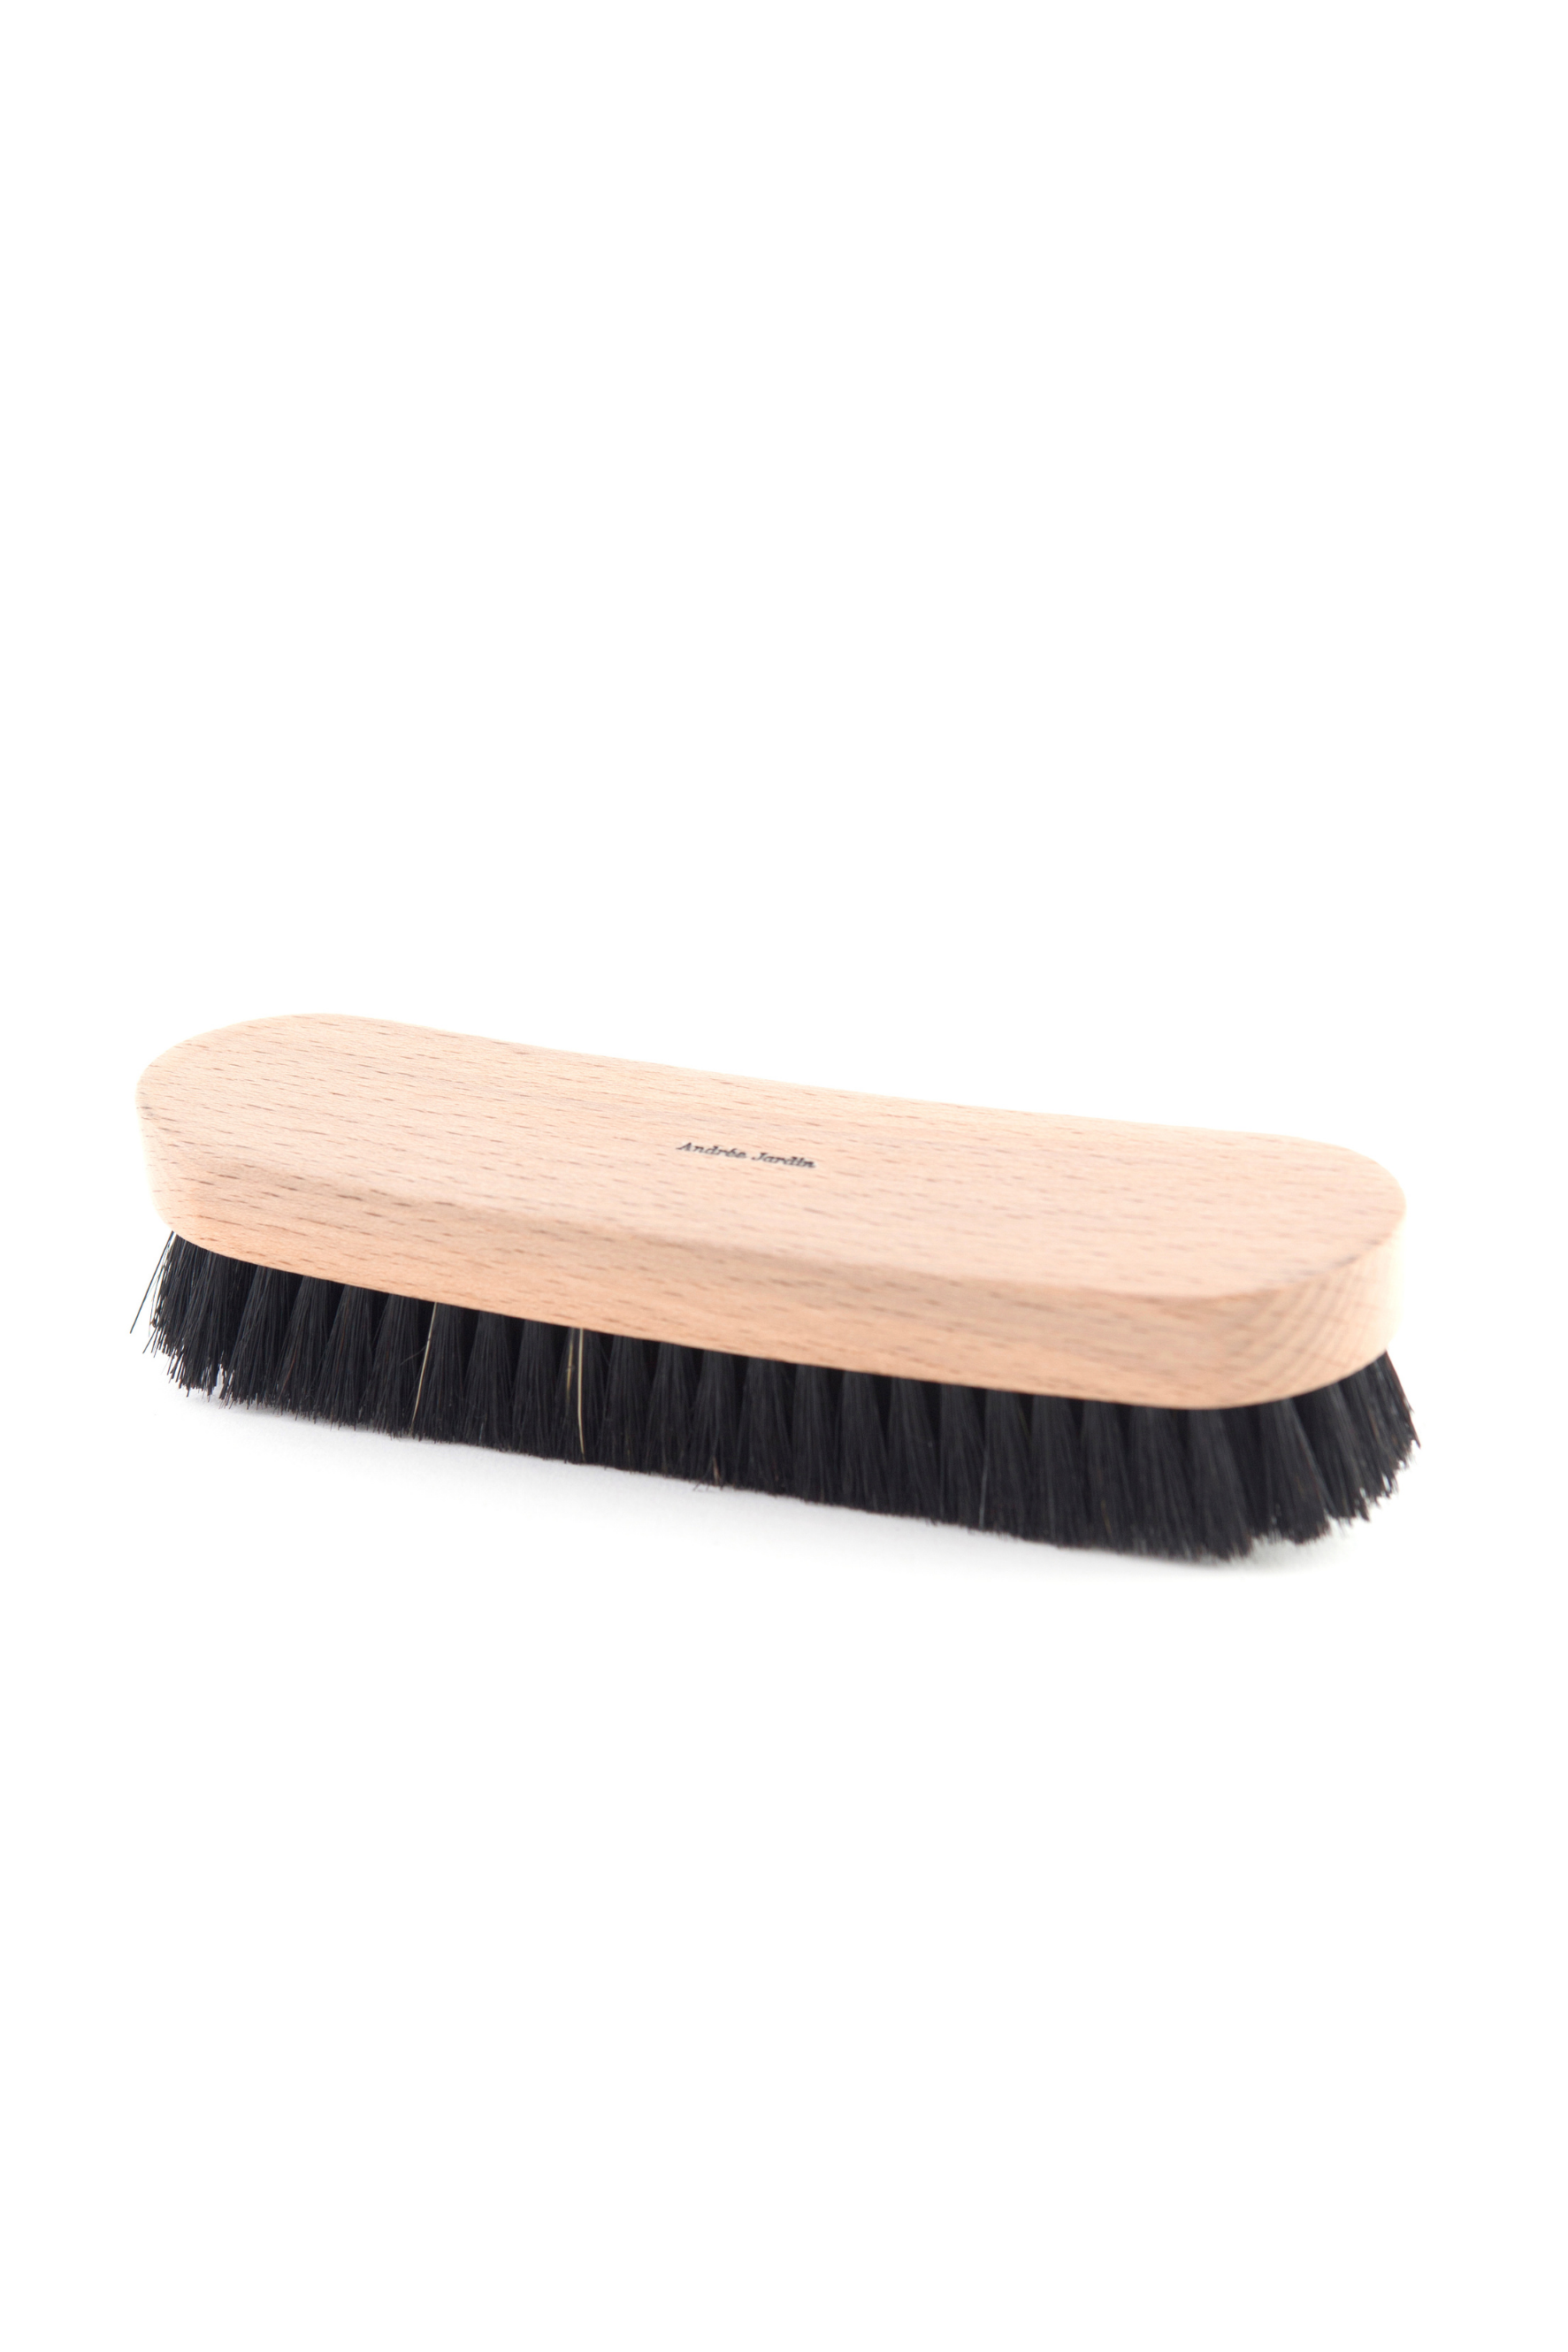 Andrée Jardin Tradition Clothing Brush Utilities Andrée Jardin Andrée Jardin Brand_Andrée Jardin Home_Broom Sets Home_Household Cleaning Shoe & Textile Brushes image_3d014430-5acc-443b-ba0e-35e0072b8da6